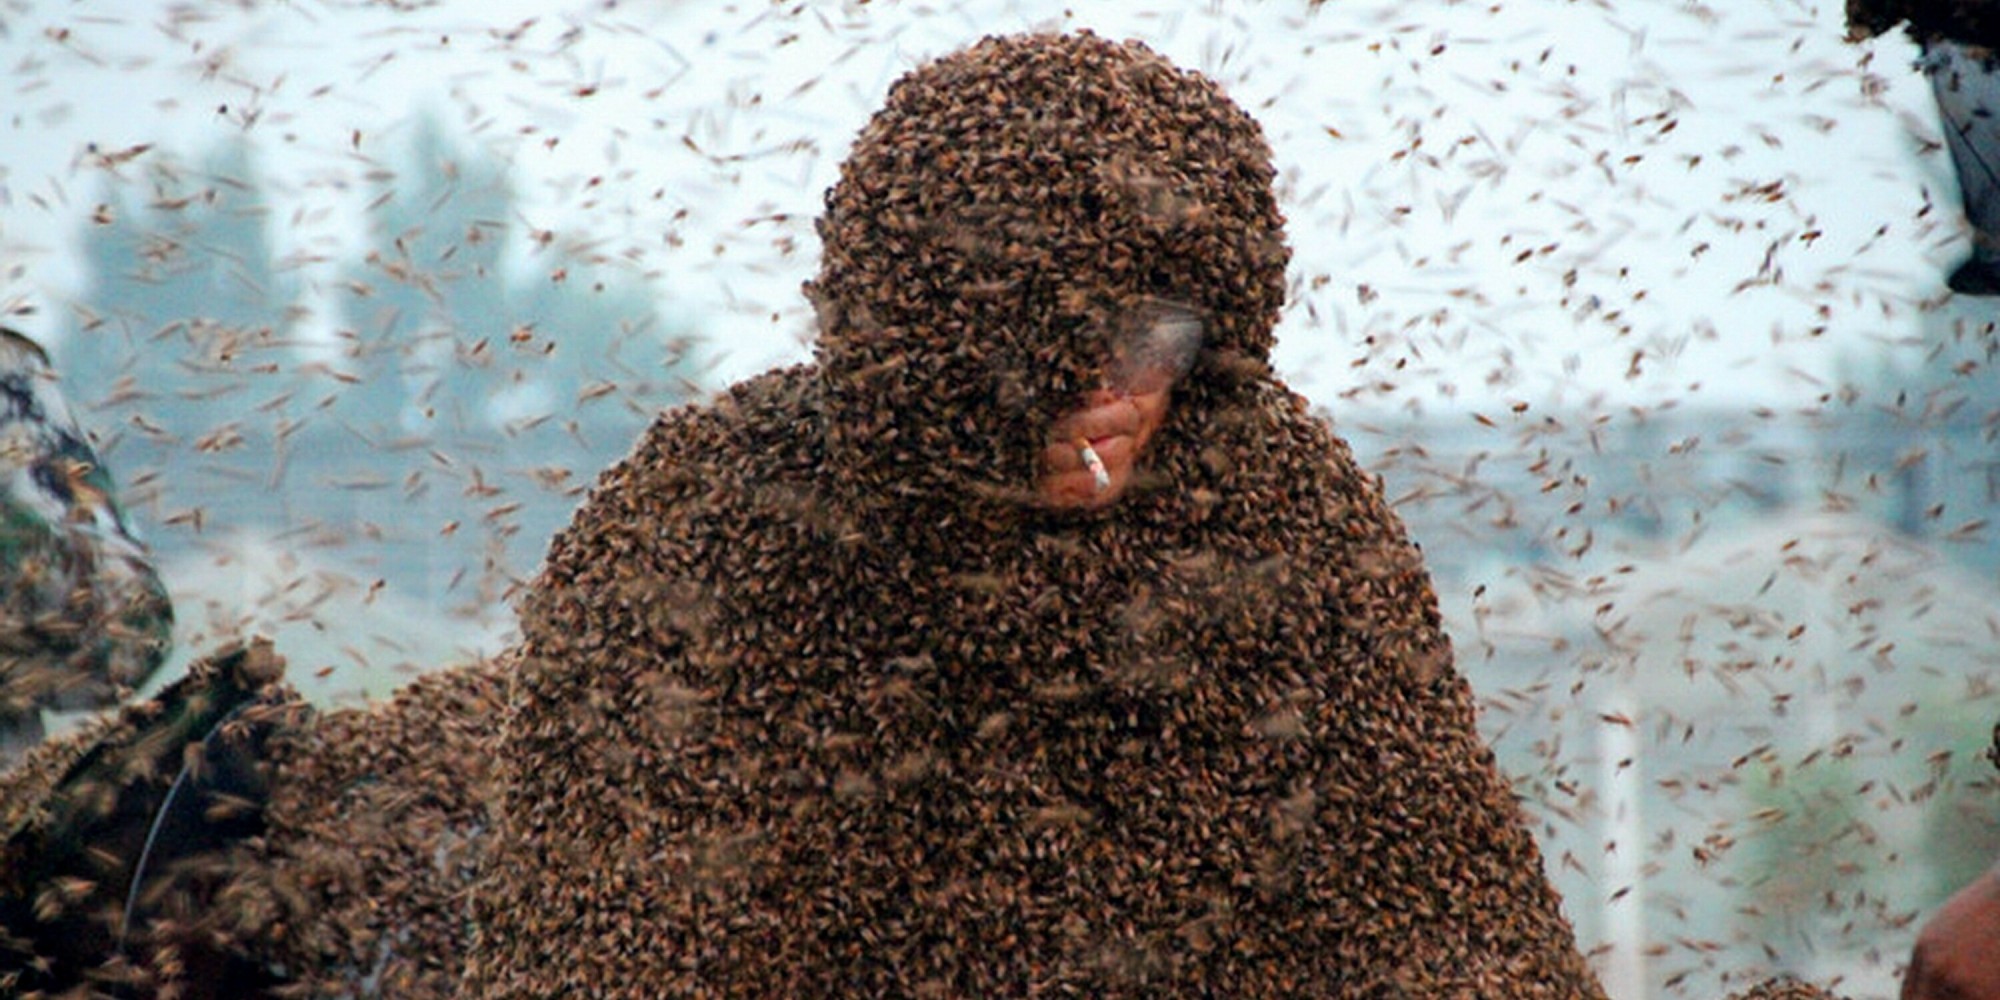 Man Wears Suit Made Of 11 Million Bees In Attempt To Set World Record Huffpost